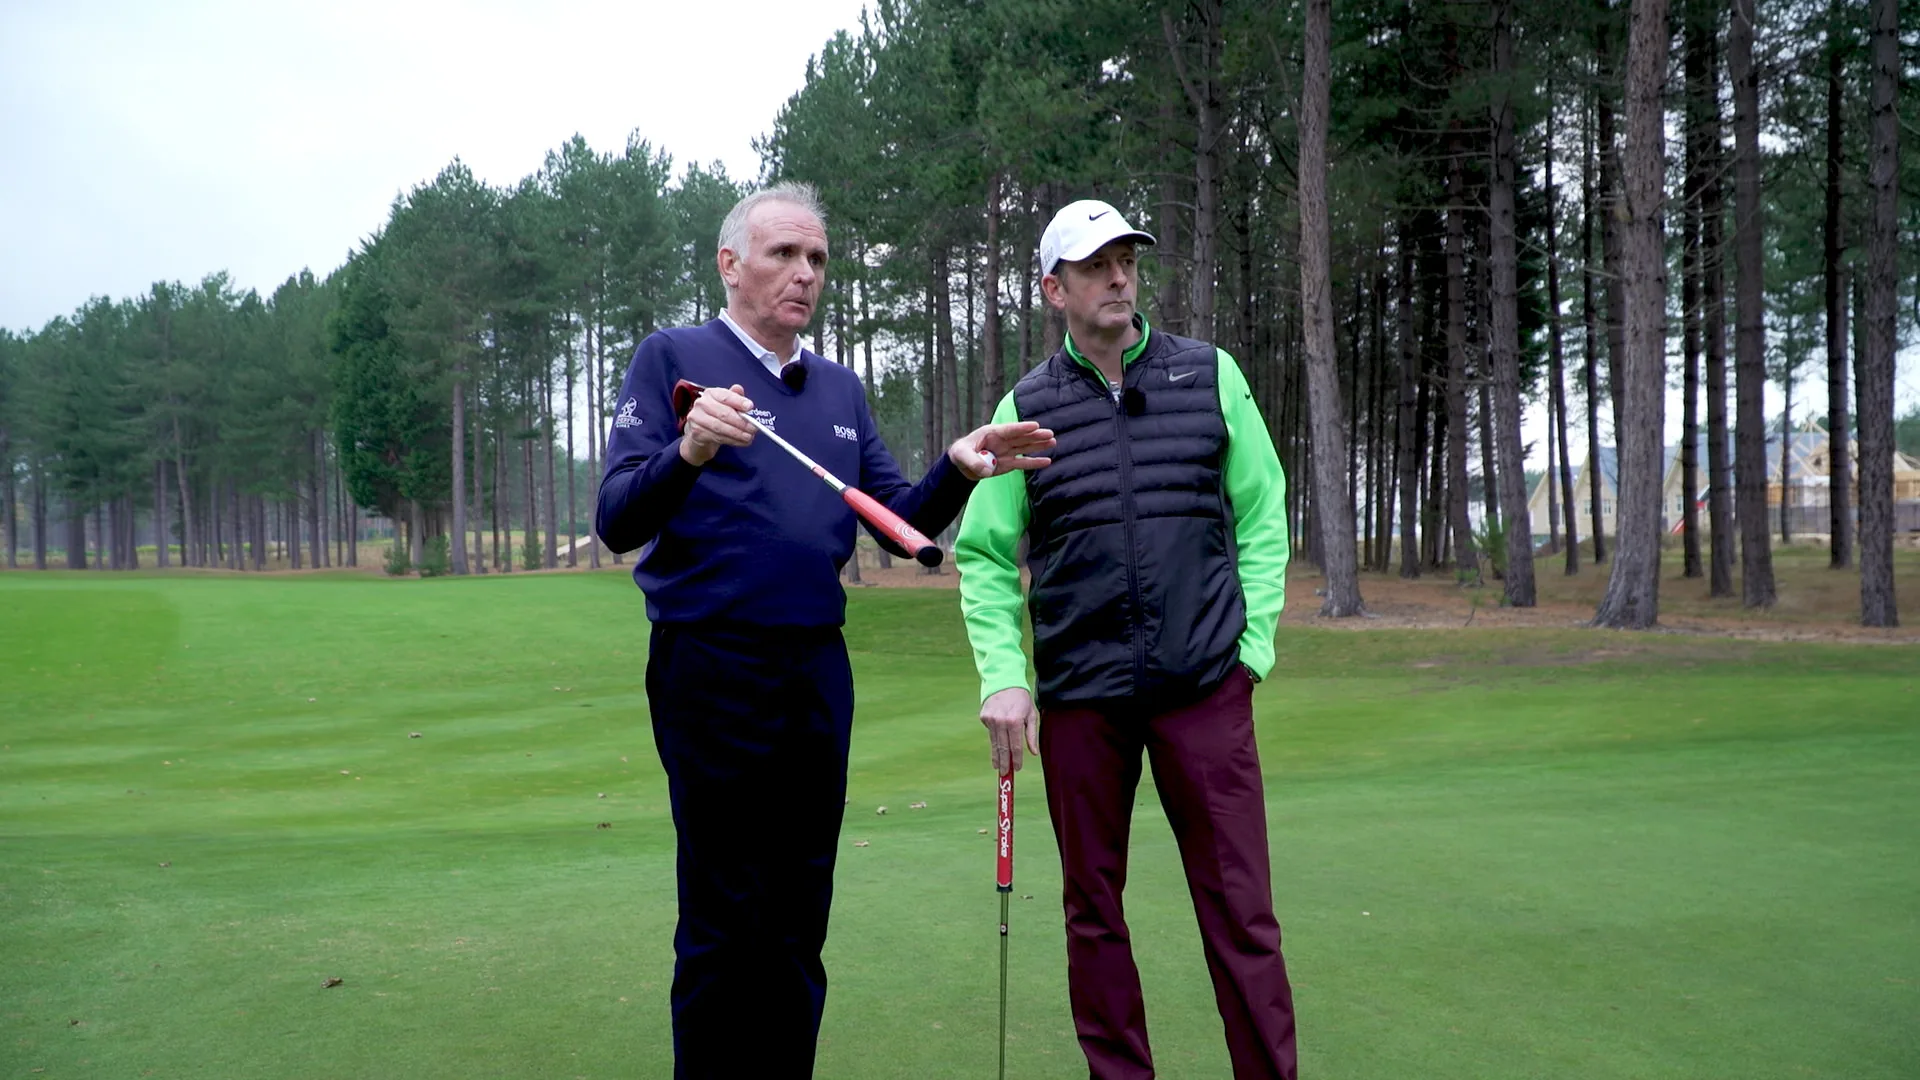 Improve your putting: The key points to reading greens